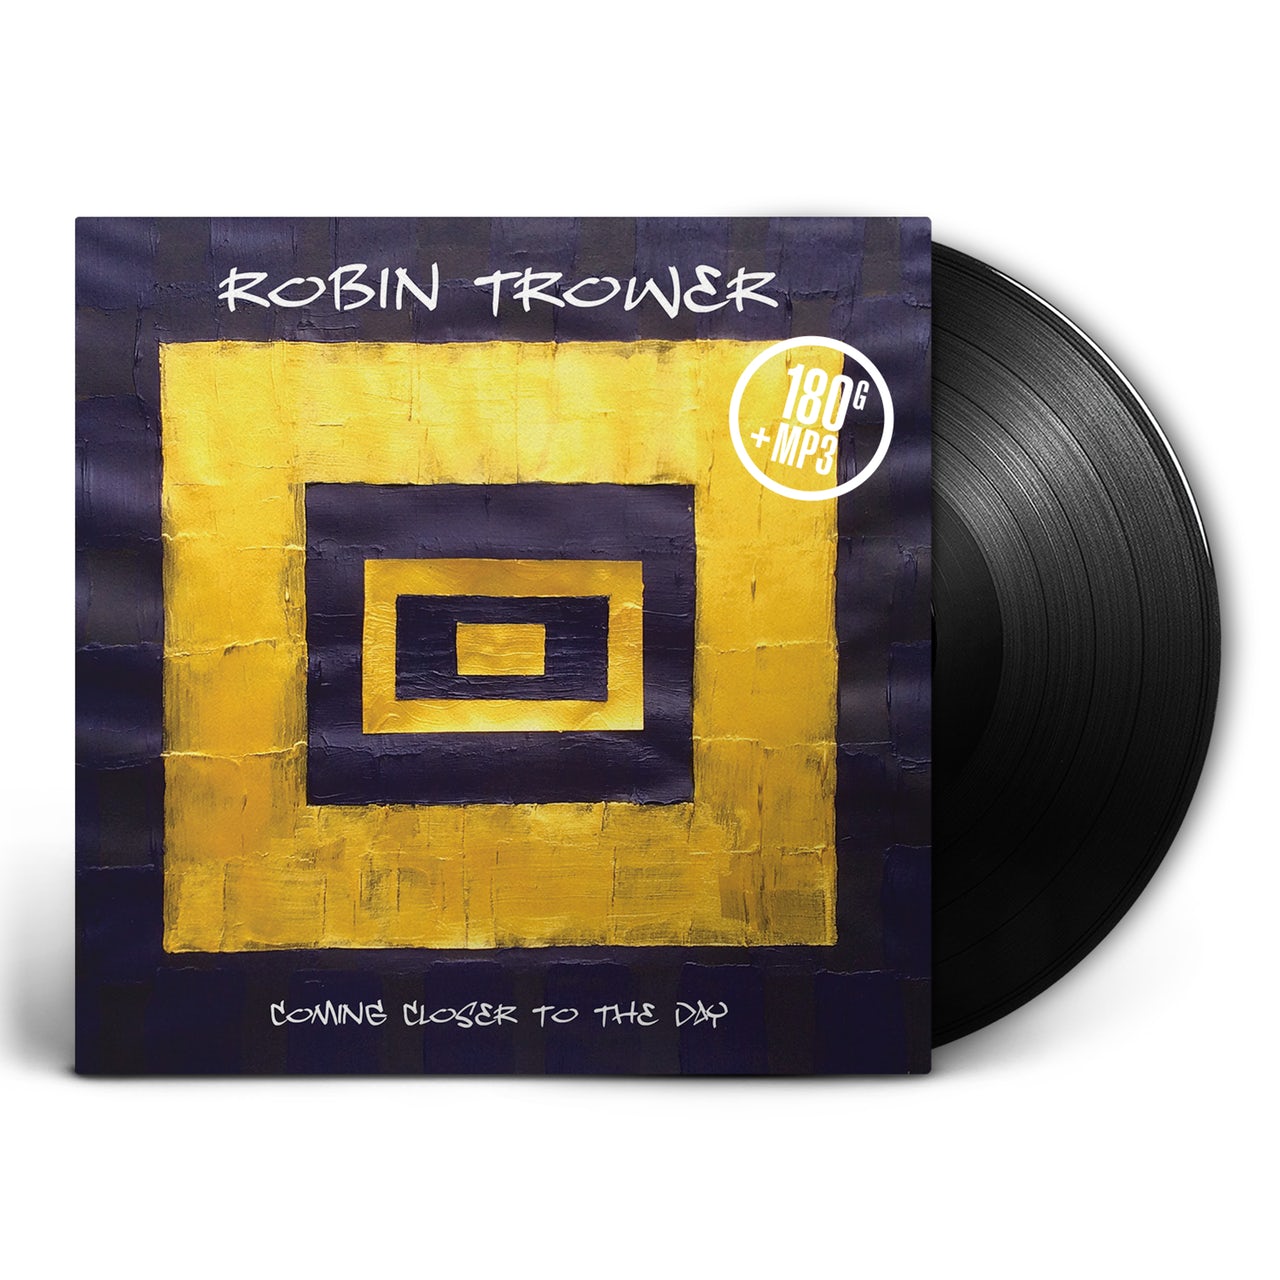 Trower, Robin - Coming Closer To the Day